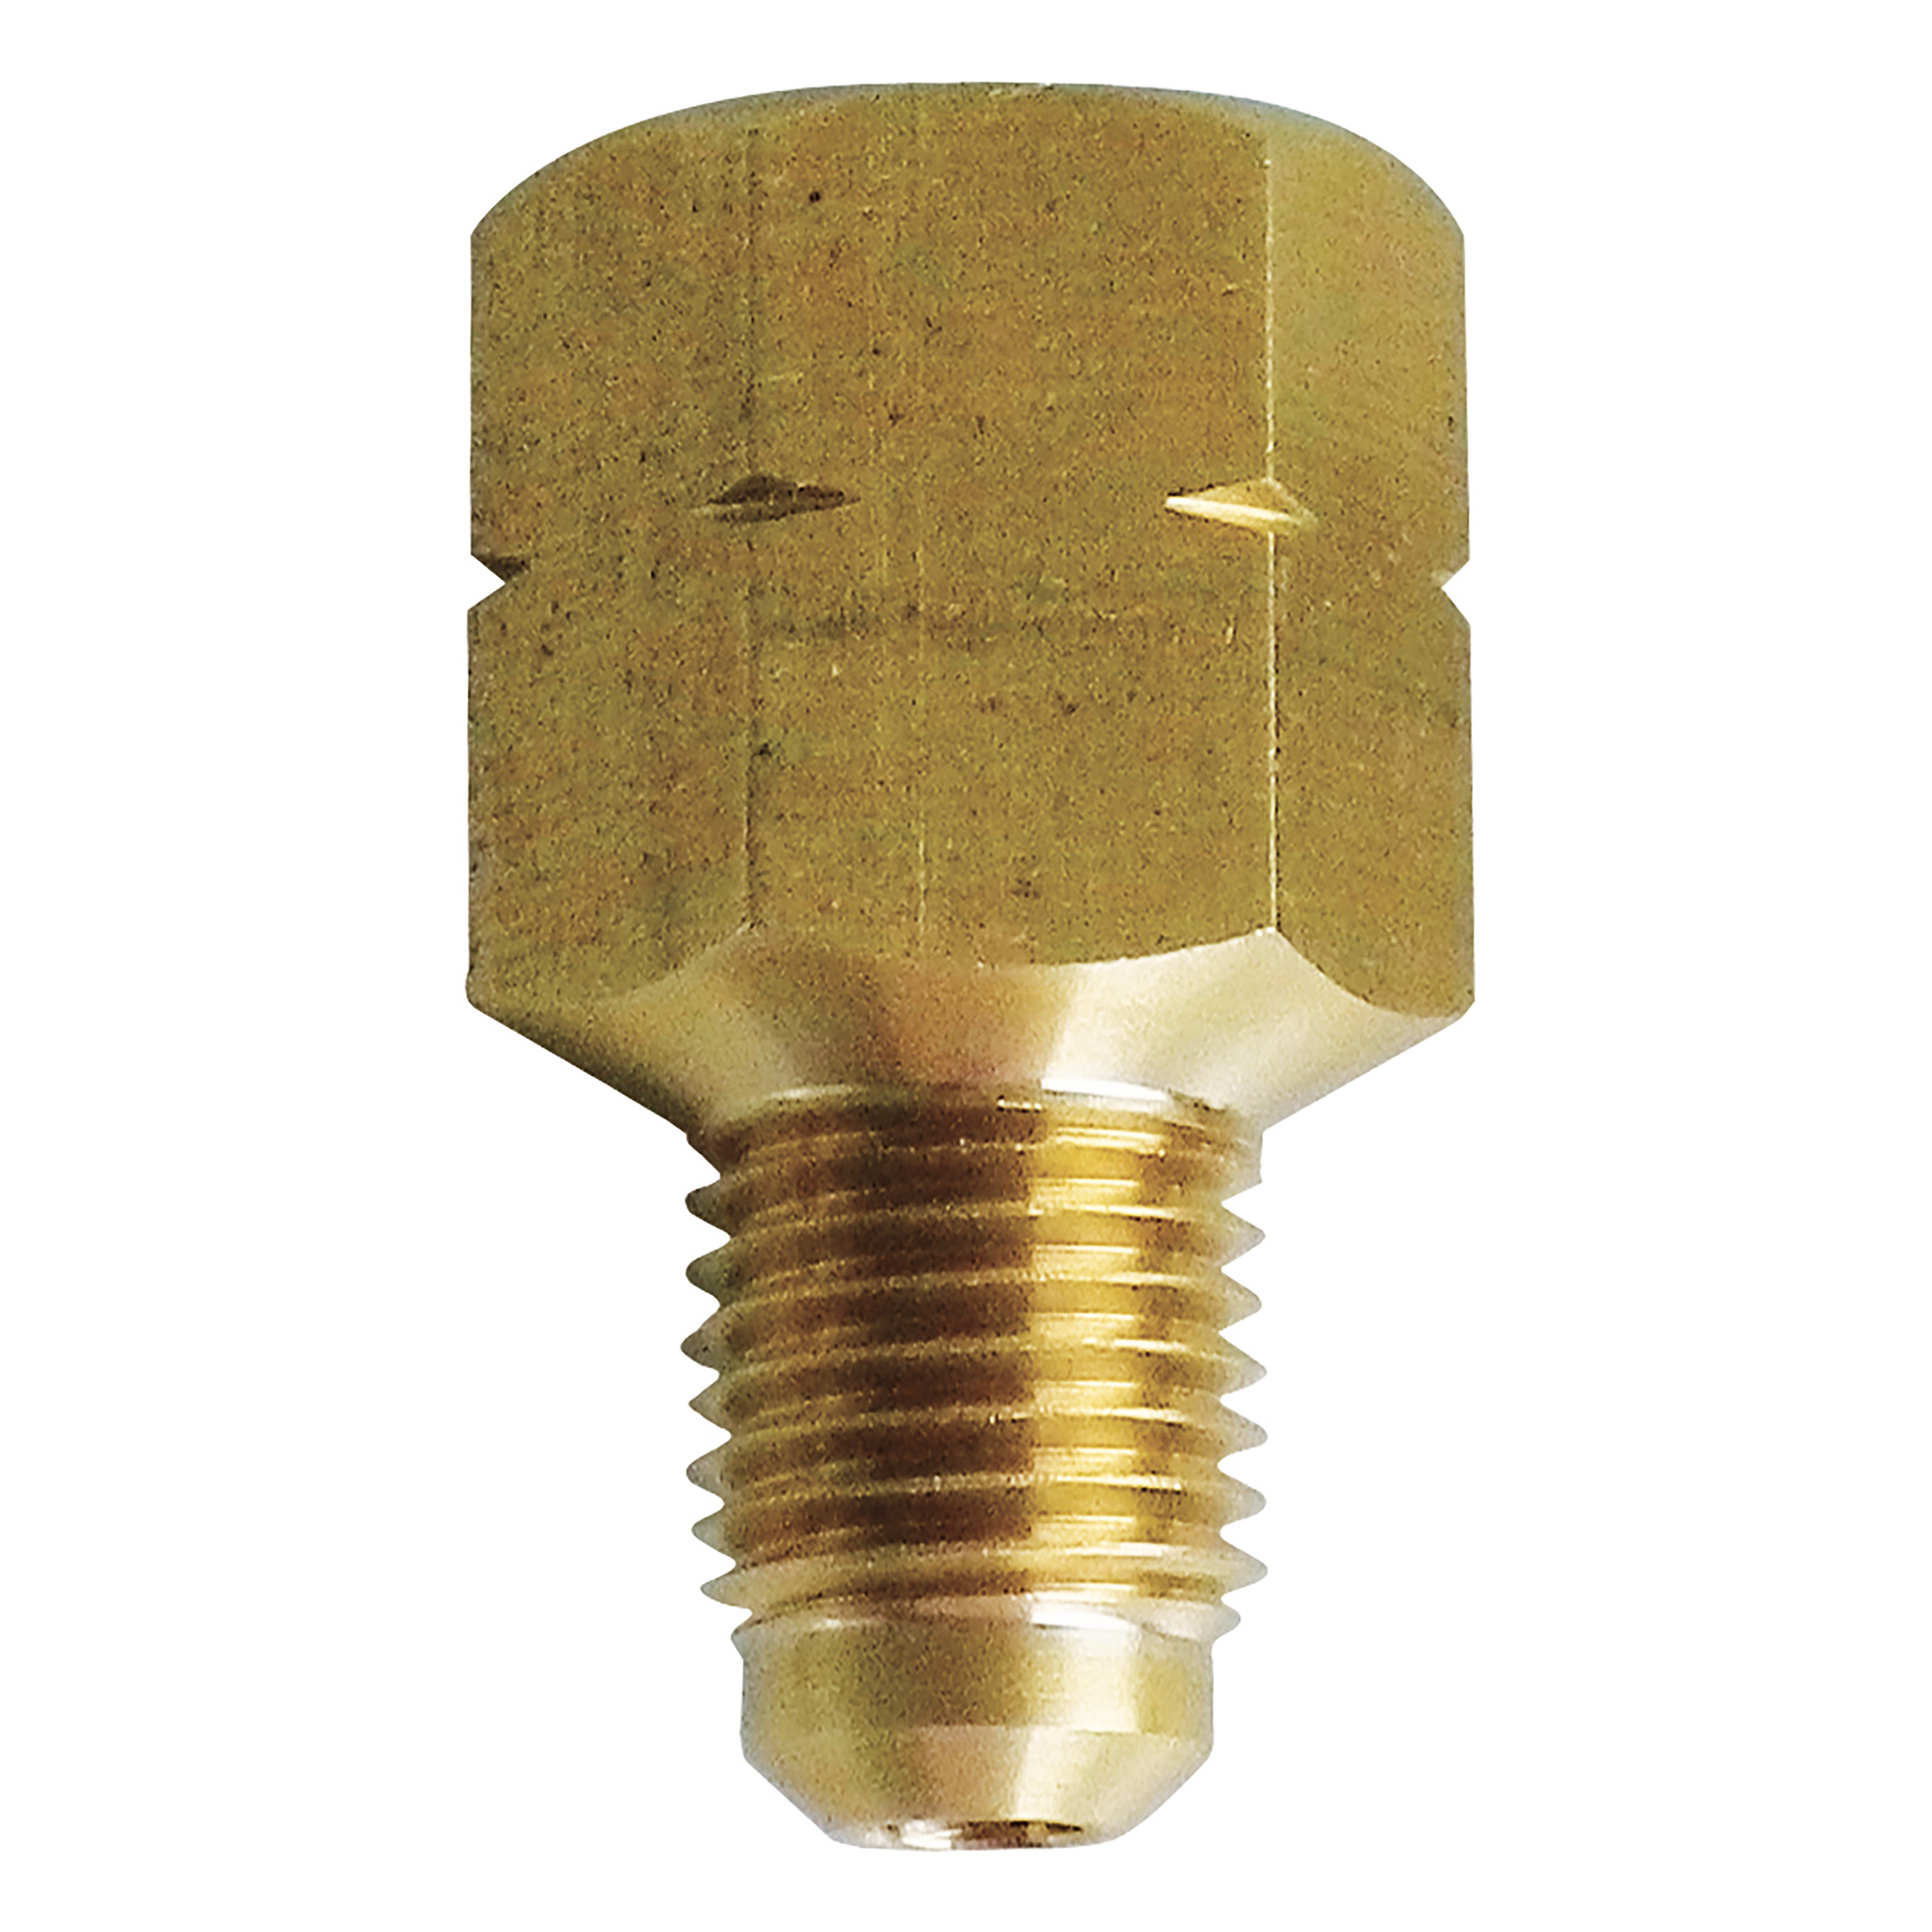 Adaptor climate-service inert gas inner thread left hand,outer thread right hand